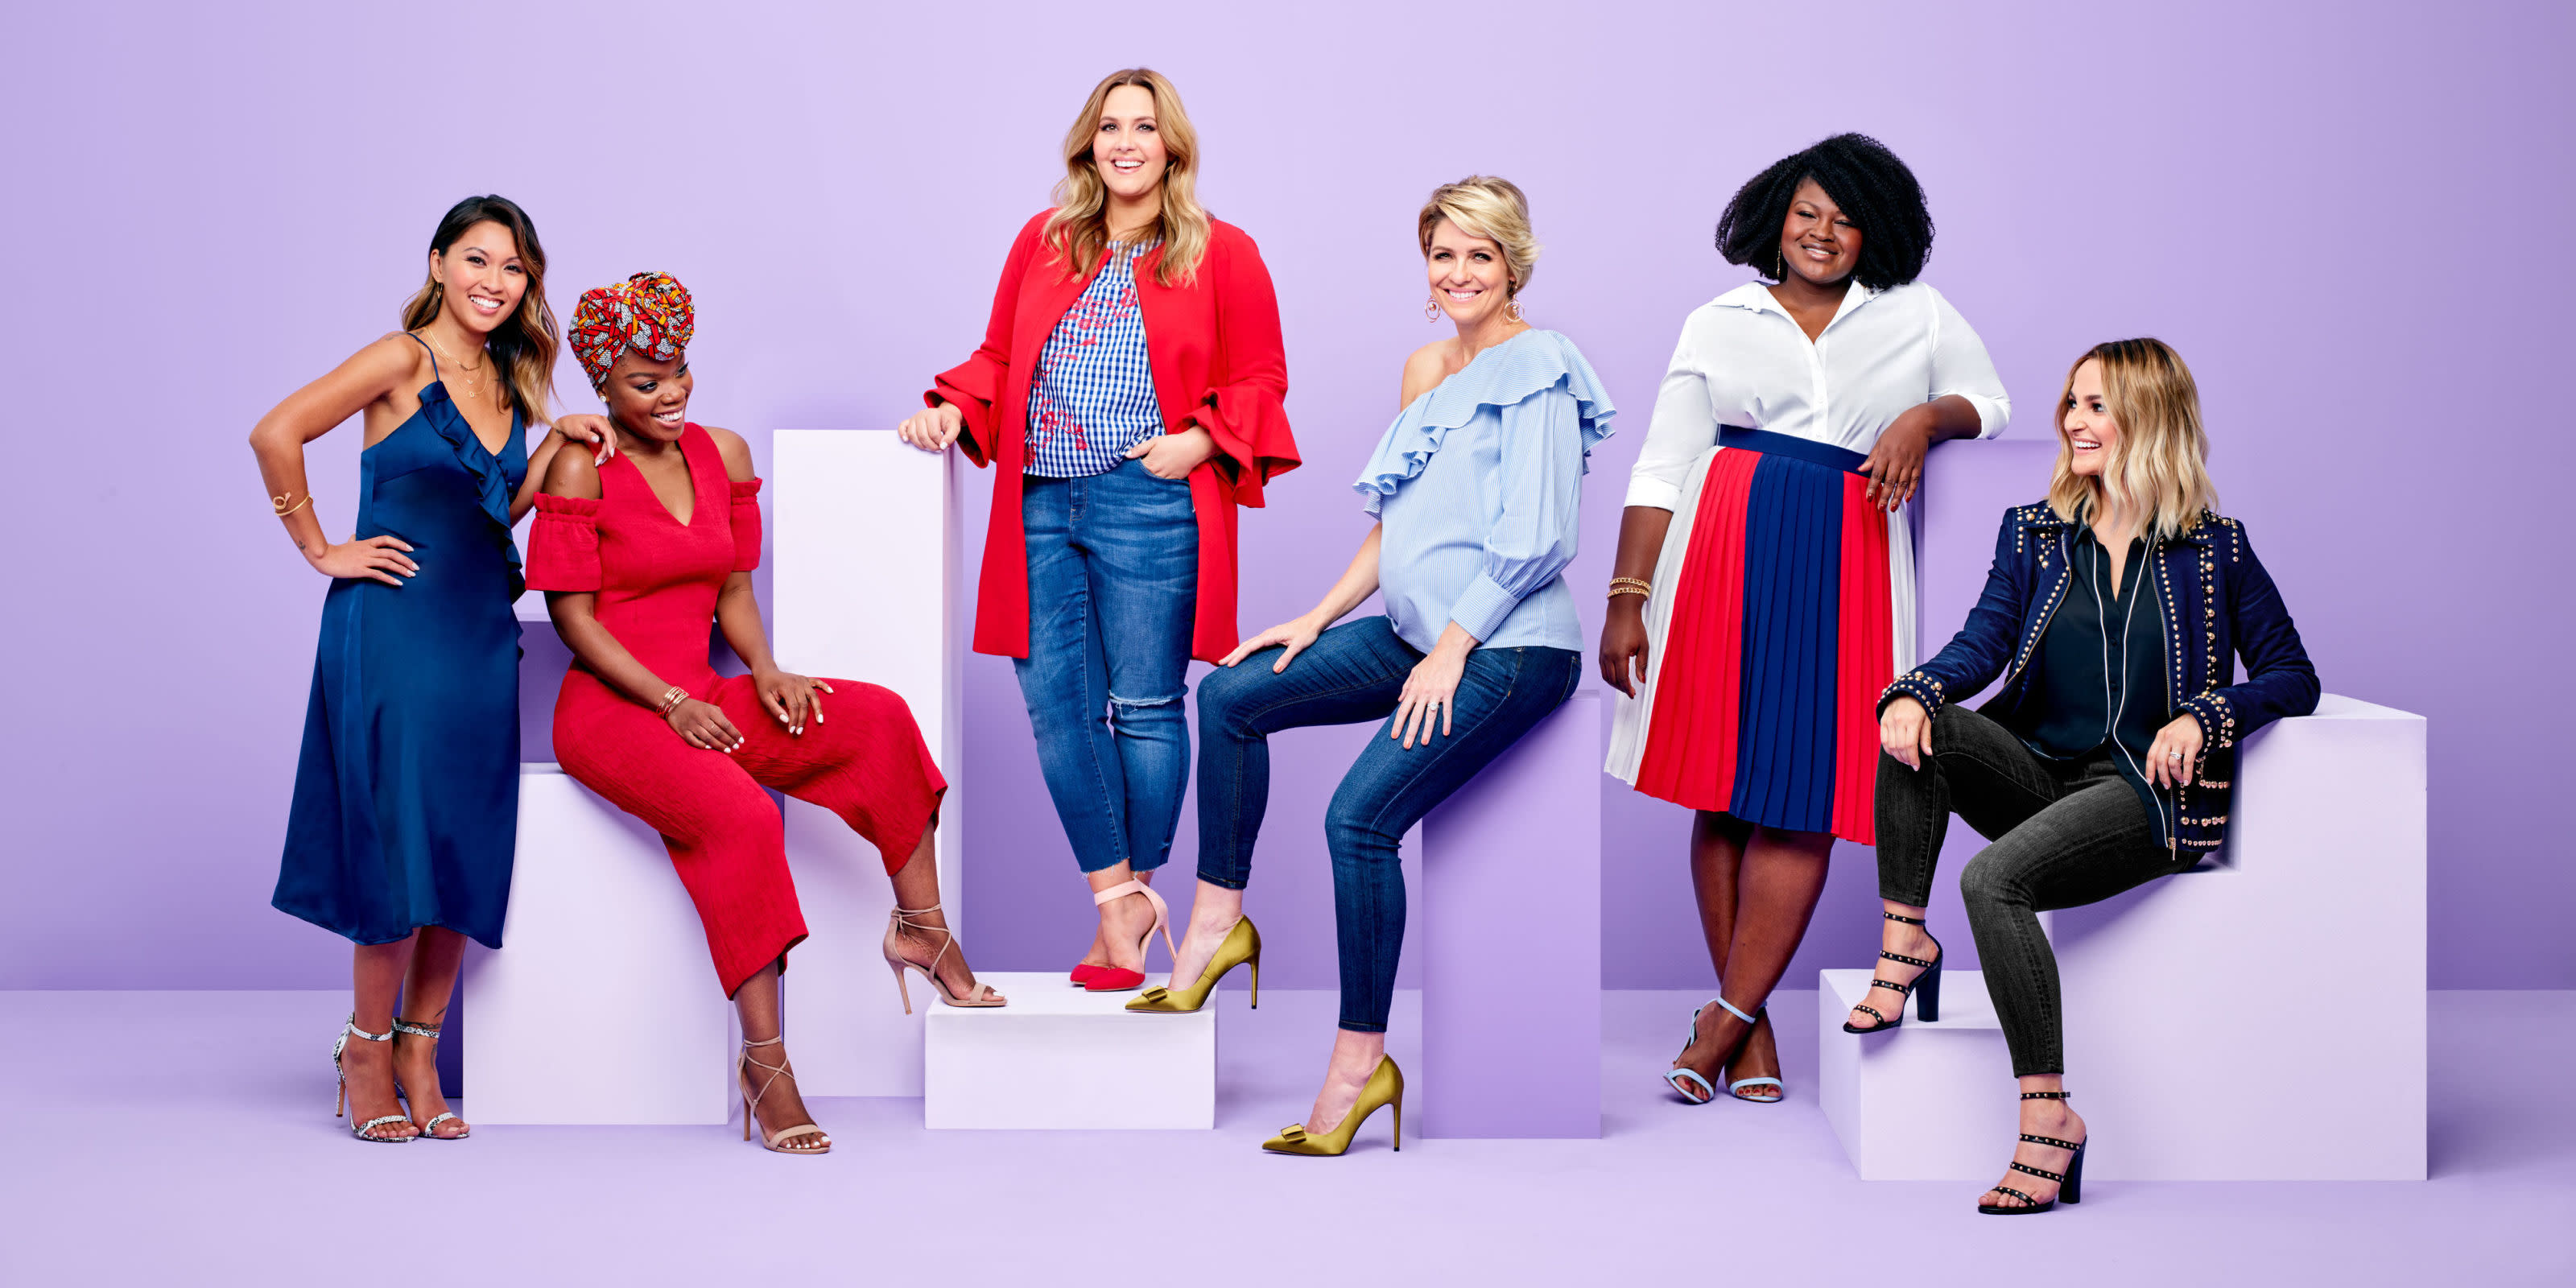 Meet the 2017 Winners of Redbook's Real Women Style Awards!